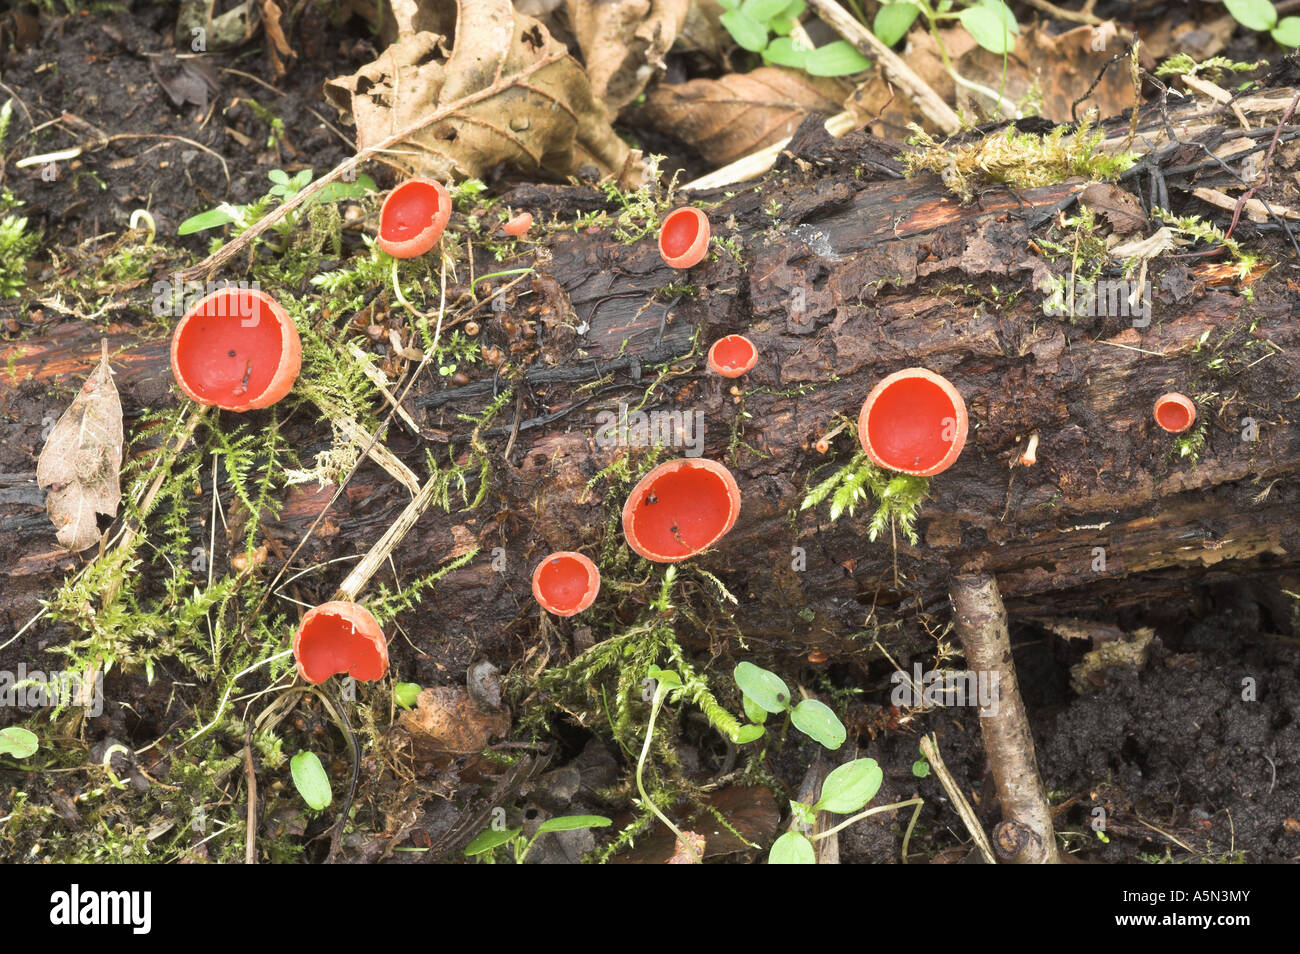 Fungi Scarlet Elf Cup sarcoscypha coccinea fruiting bodies on decaying wood Stock Photo